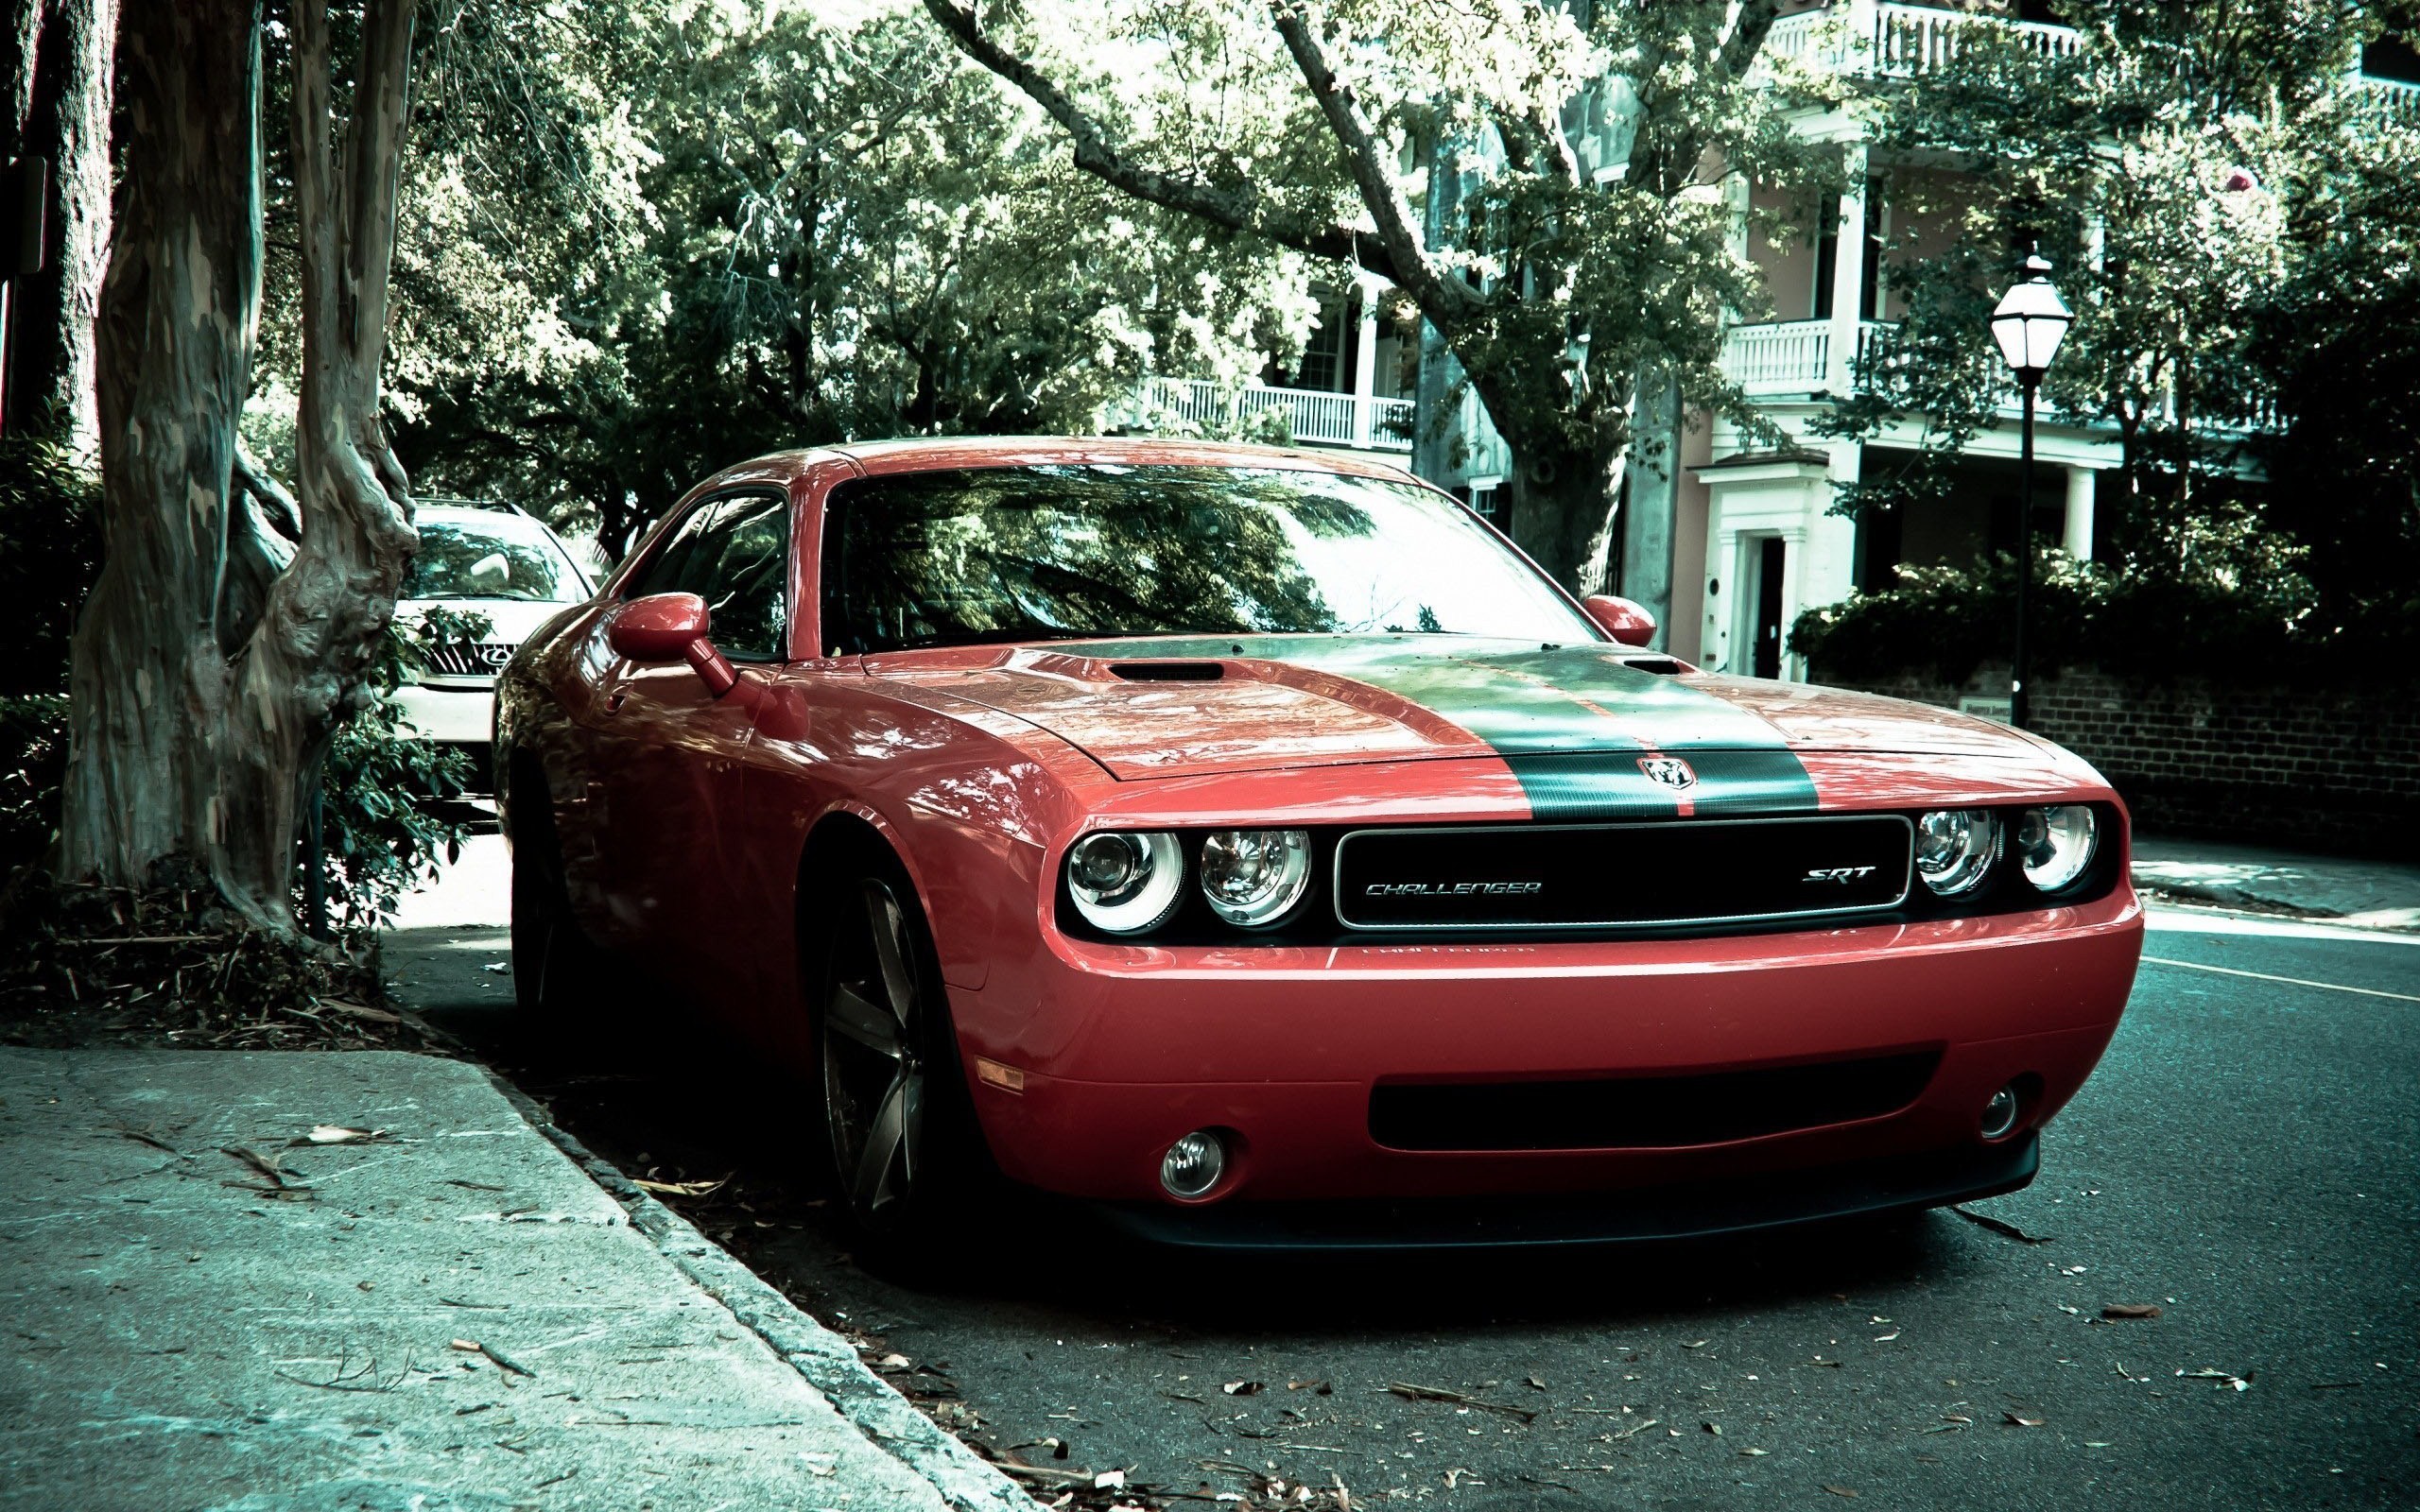 2560x1600 ... Free Muscle Car Wallpapers - Wallpaper Cave ...